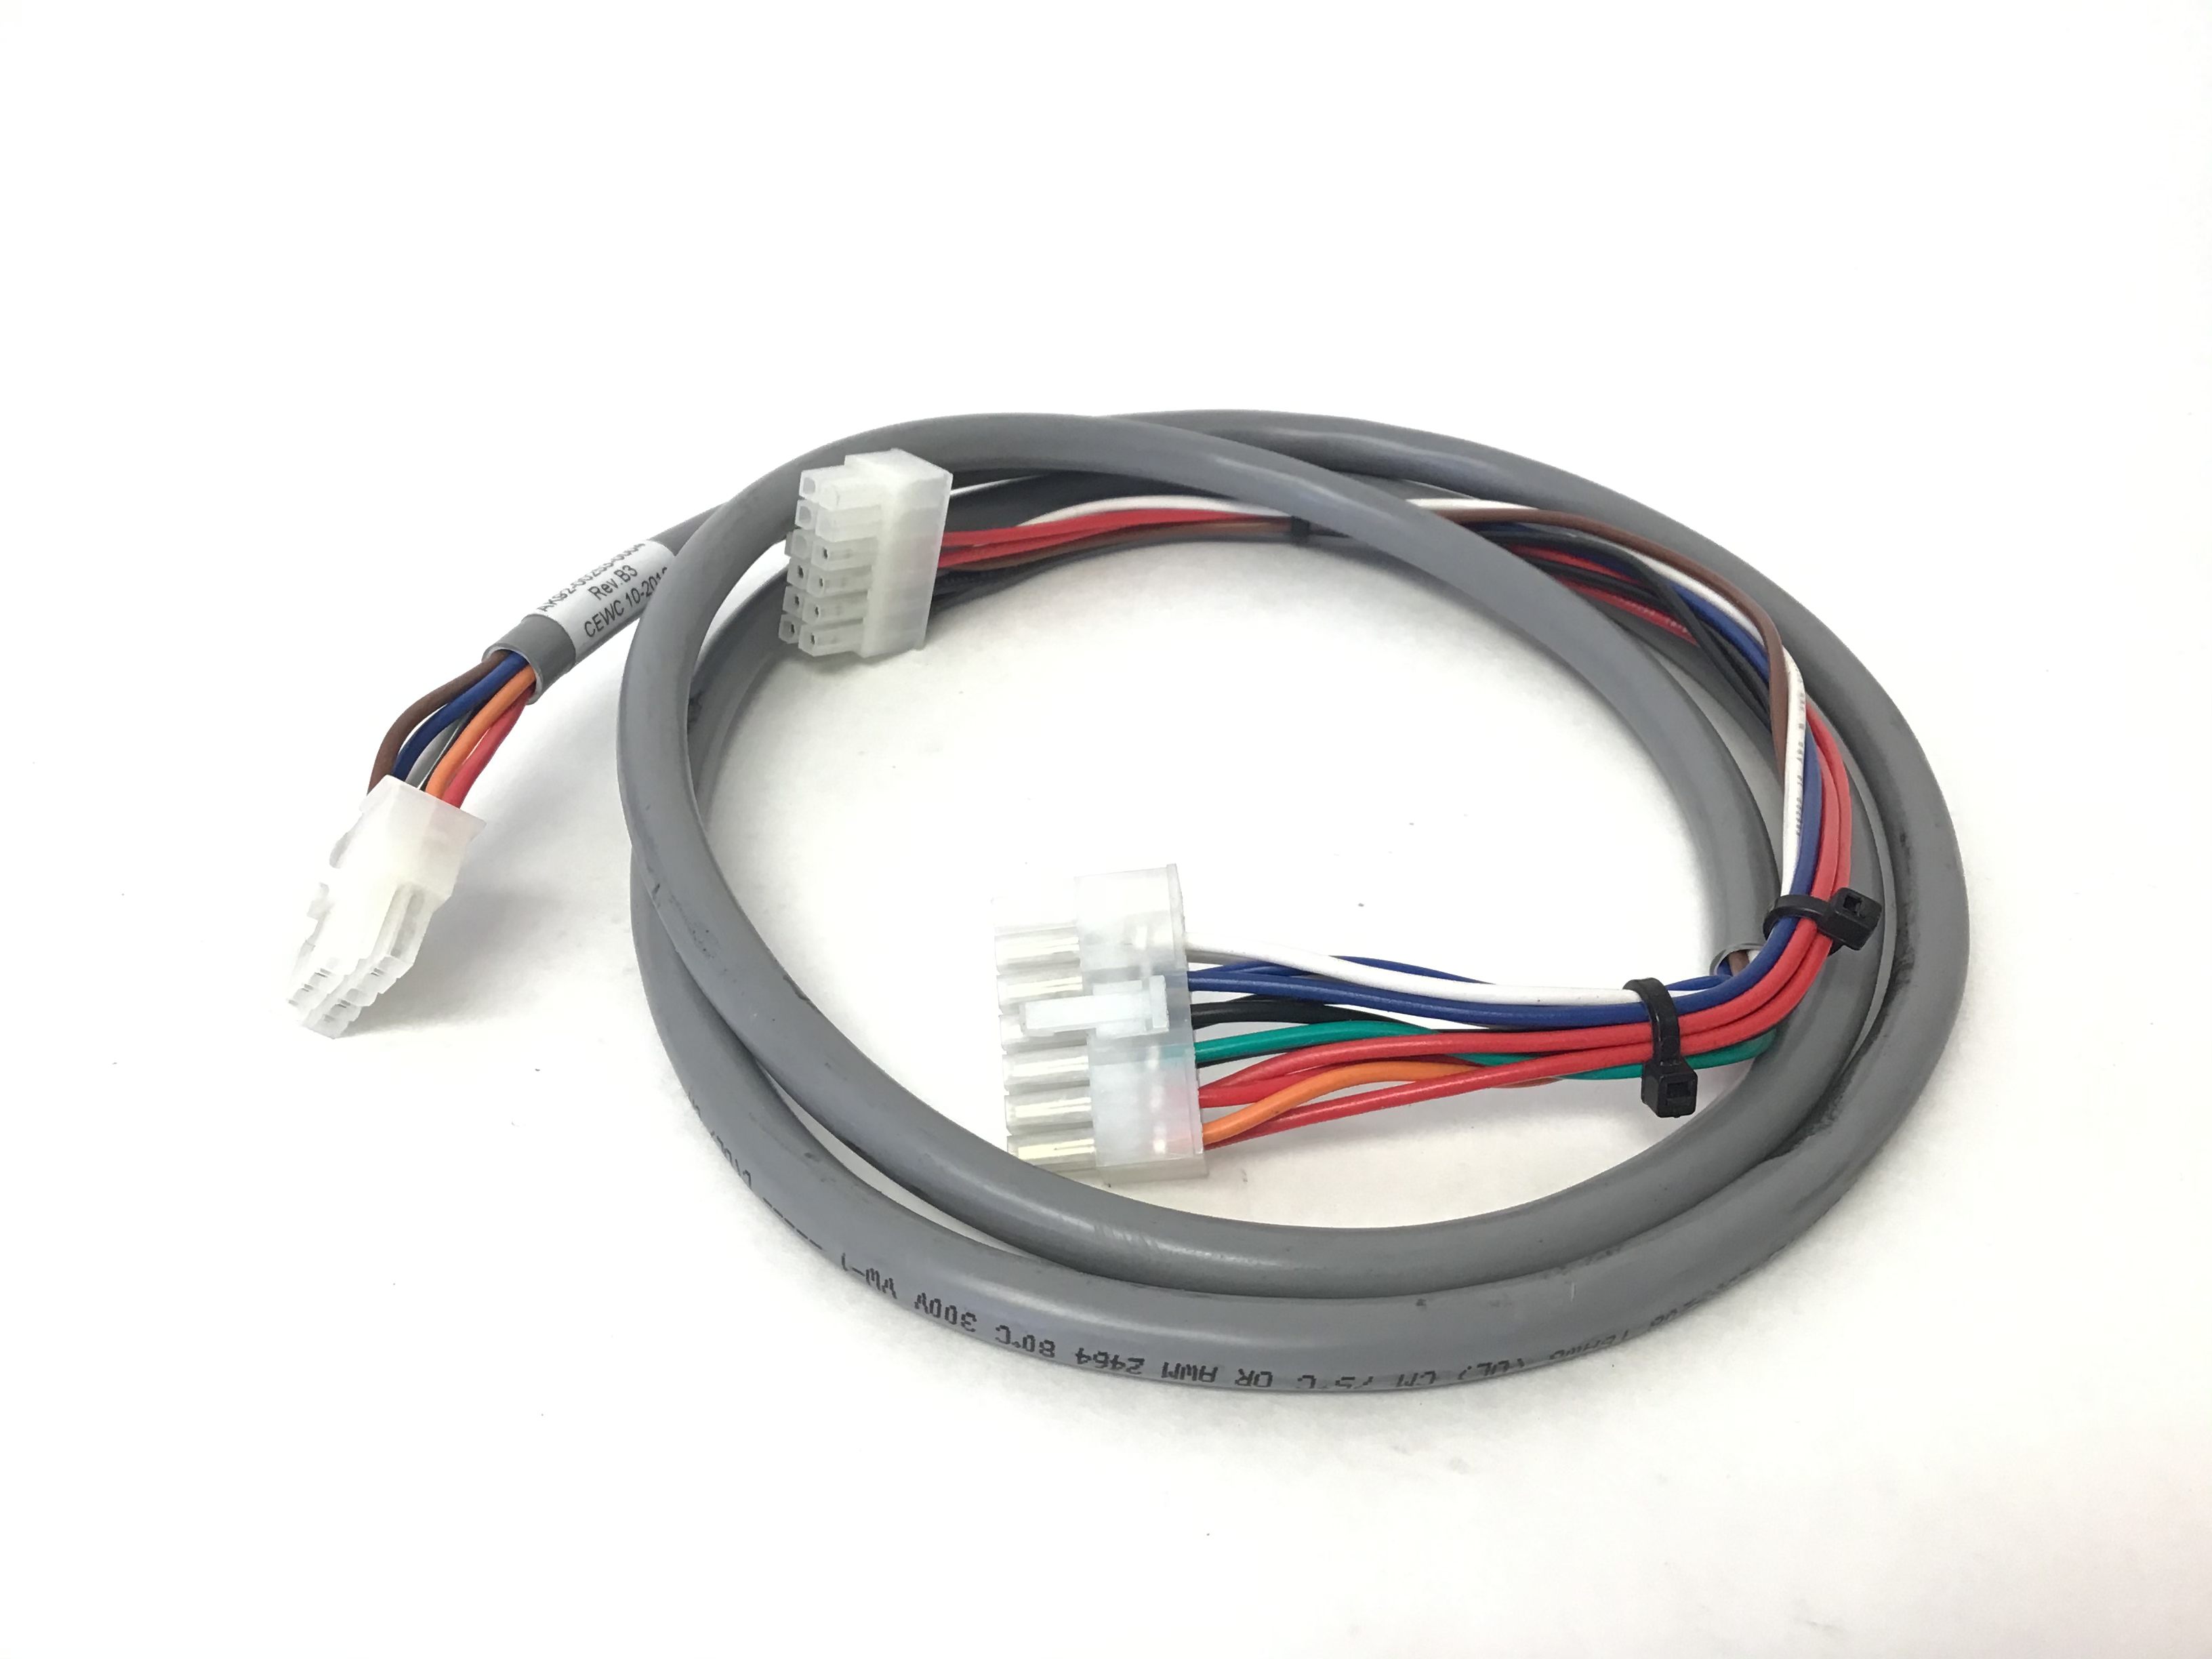 CABLE ASSEMBLY POWER HUB TO DISCOVER CONSOLE FLEXSTRIDER